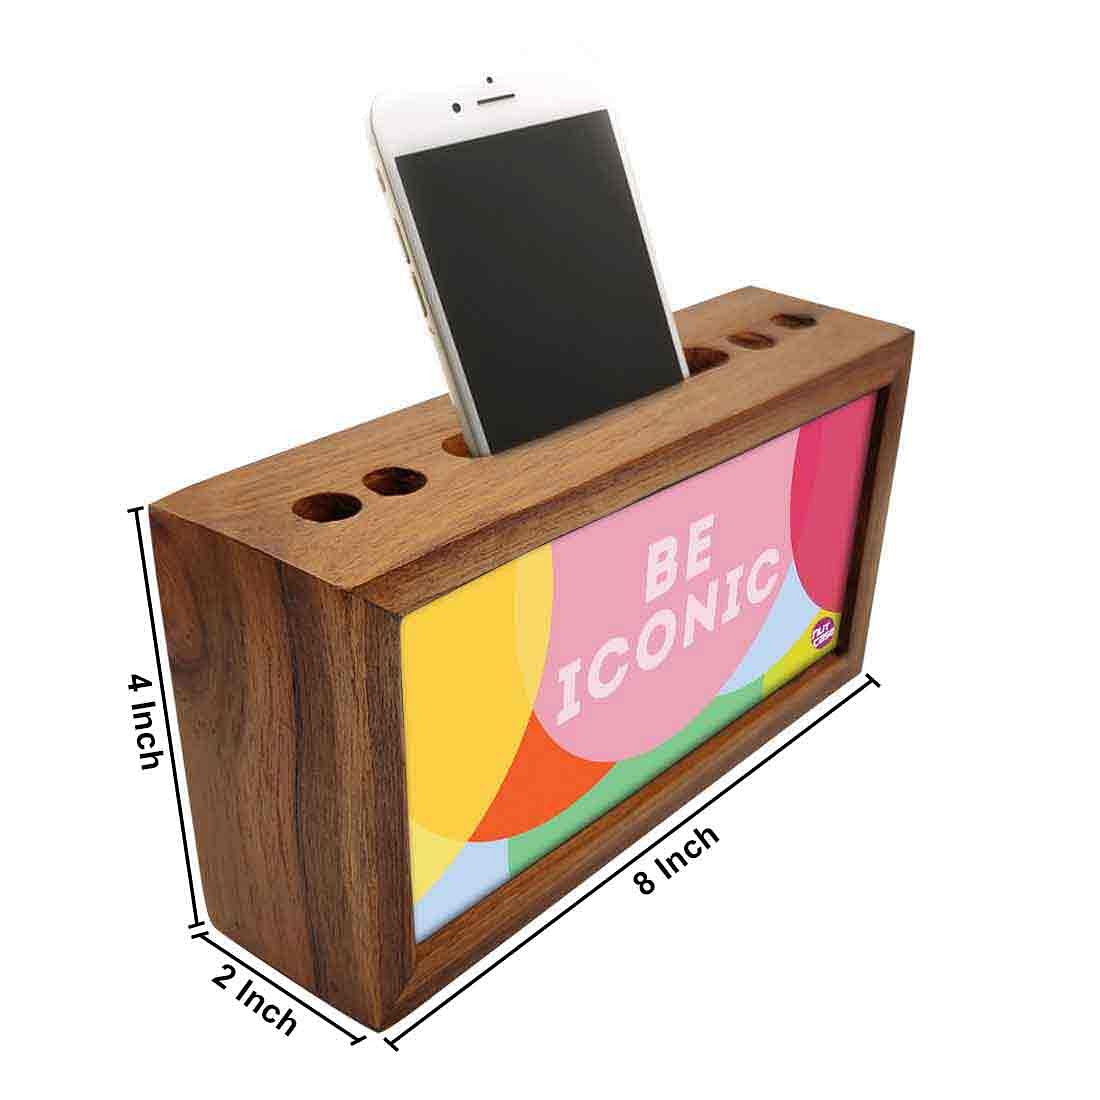 Wood office organizer Pen Mobile Stand - Be Iconic Nutcase